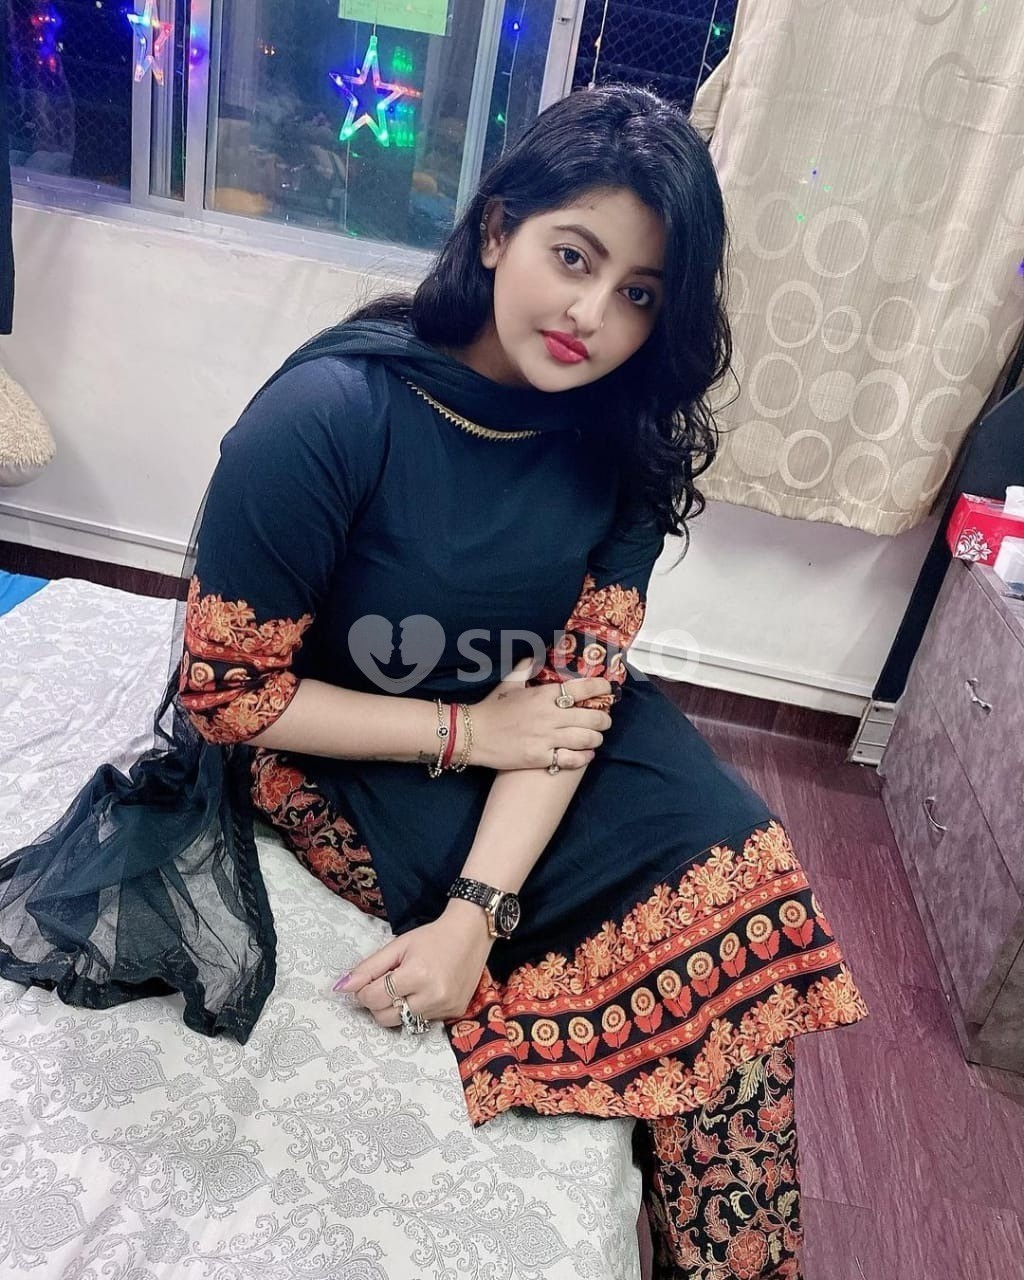 Goregaon Sunita Low price 100% genuine 👥 sexy VIP call girls are provided👌safe and secure service .call 📞,,24 h